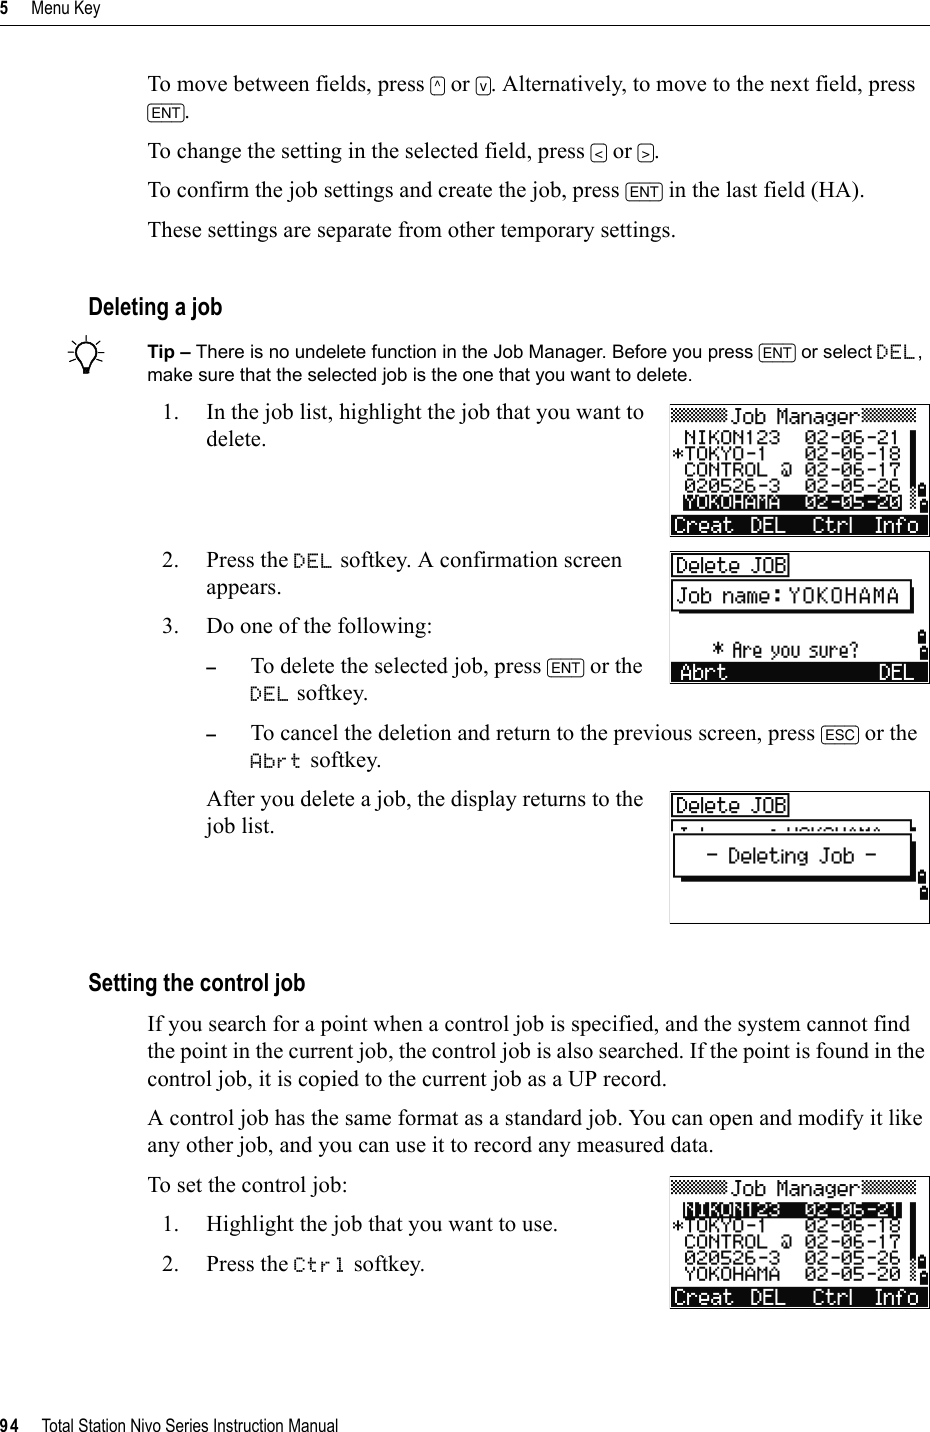 5     Menu Key94     Total Station Nivo Series Instruction ManualTo move between fields, press [^] or [v]. Alternatively, to move to the next field, press [ENT].To change the setting in the selected field, press [&lt;] or [&gt;].To confirm the job settings and create the job, press [ENT] in the last field (HA).These settings are separate from other temporary settings.Deleting a jobBTip – There is no undelete function in the Job Manager. Before you press [ENT] or select DEL,make sure that the selected job is the one that you want to delete.1. In the job list, highlight the job that you want to delete.2. Press the DEL softkey. A confirmation screen appears.3. Do one of the following: –To delete the selected job, press [ENT] or the DEL softkey.–To cancel the deletion and return to the previous screen, press [ESC] or the Abrt softkey. After you delete a job, the display returns to the job list.Setting the control jobIf you search for a point when a control job is specified, and the system cannot find the point in the current job, the control job is also searched. If the point is found in the control job, it is copied to the current job as a UP record.A control job has the same format as a standard job. You can open and modify it like any other job, and you can use it to record any measured data.To set the control job:1. Highlight the job that you want to use.2. Press the Ctrl softkey.